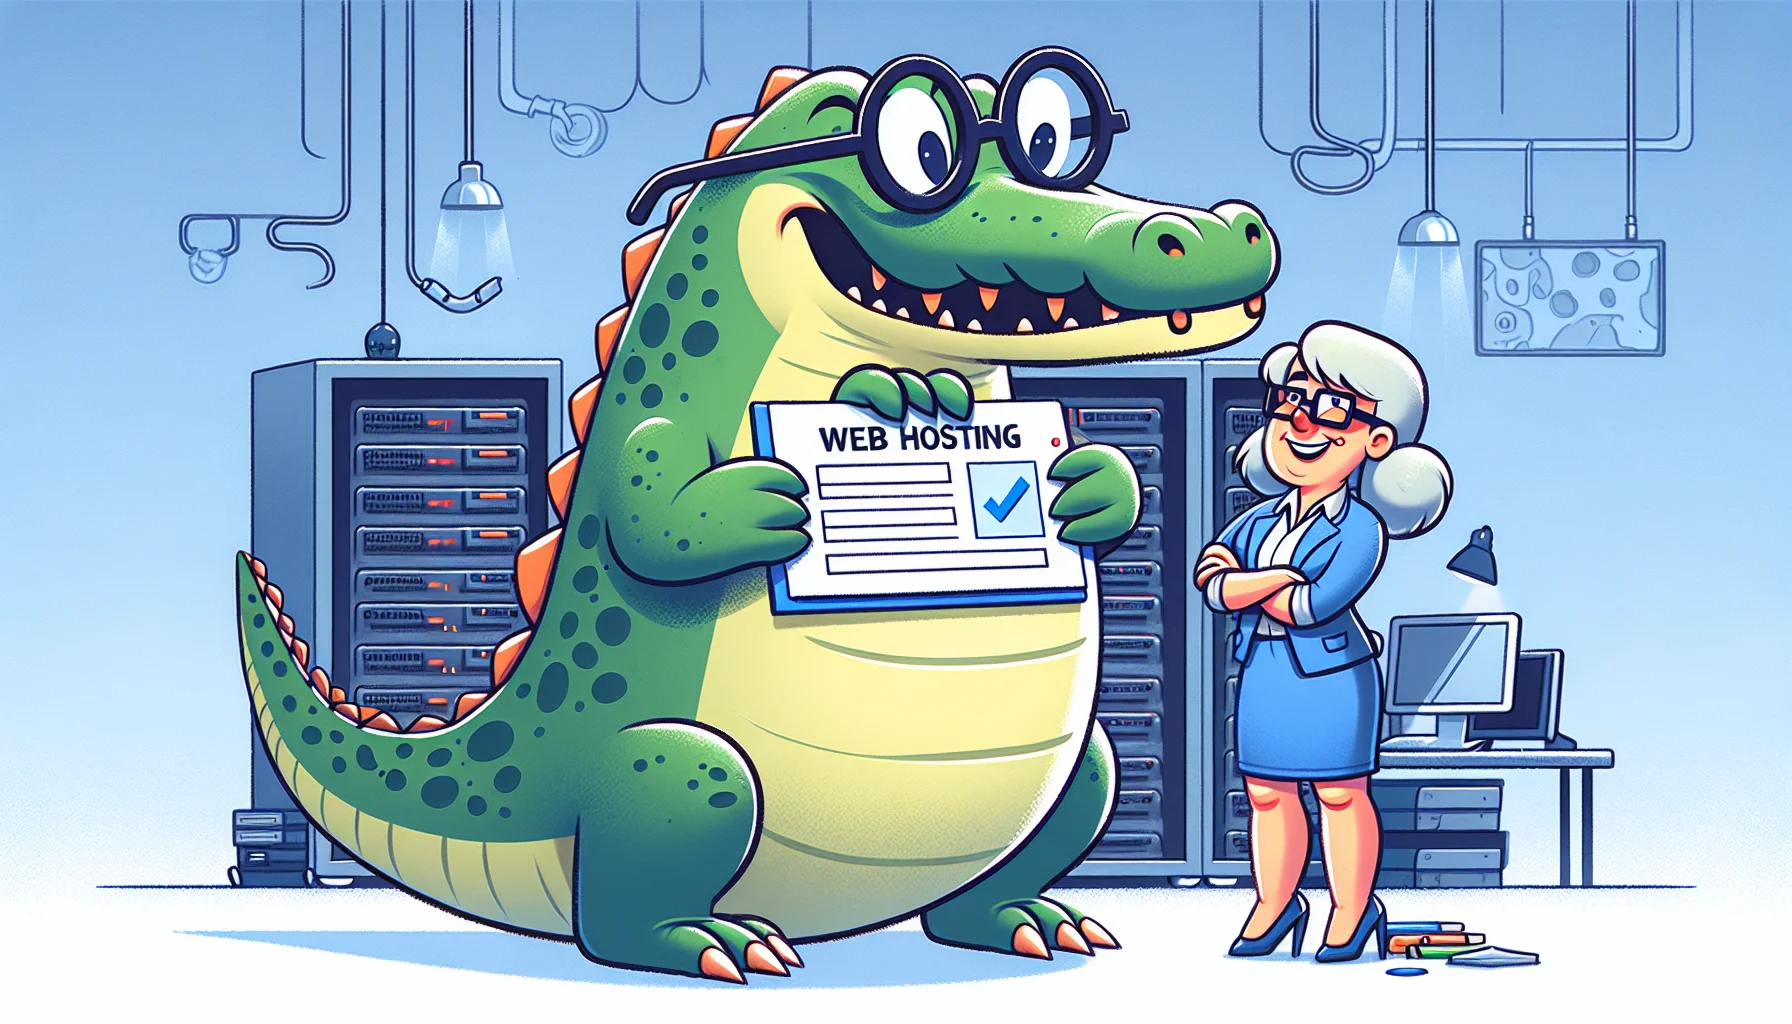 Create an image with a humorous scenario involving two characters representing web hosting. One character is a large, cartoonish alligator to represent HostGator. Make sure the alligator is showing a report card with high grades, signifying a good review. The other character is a middle-aged Caucasian woman, smiling while she attentively looks at the report card. The alligator is standing on two legs, wearing glasses as if it's an intellectual. The scene is set in a tech-filled room with servers, computers, and cables around, signifying a typical web hosting environment.